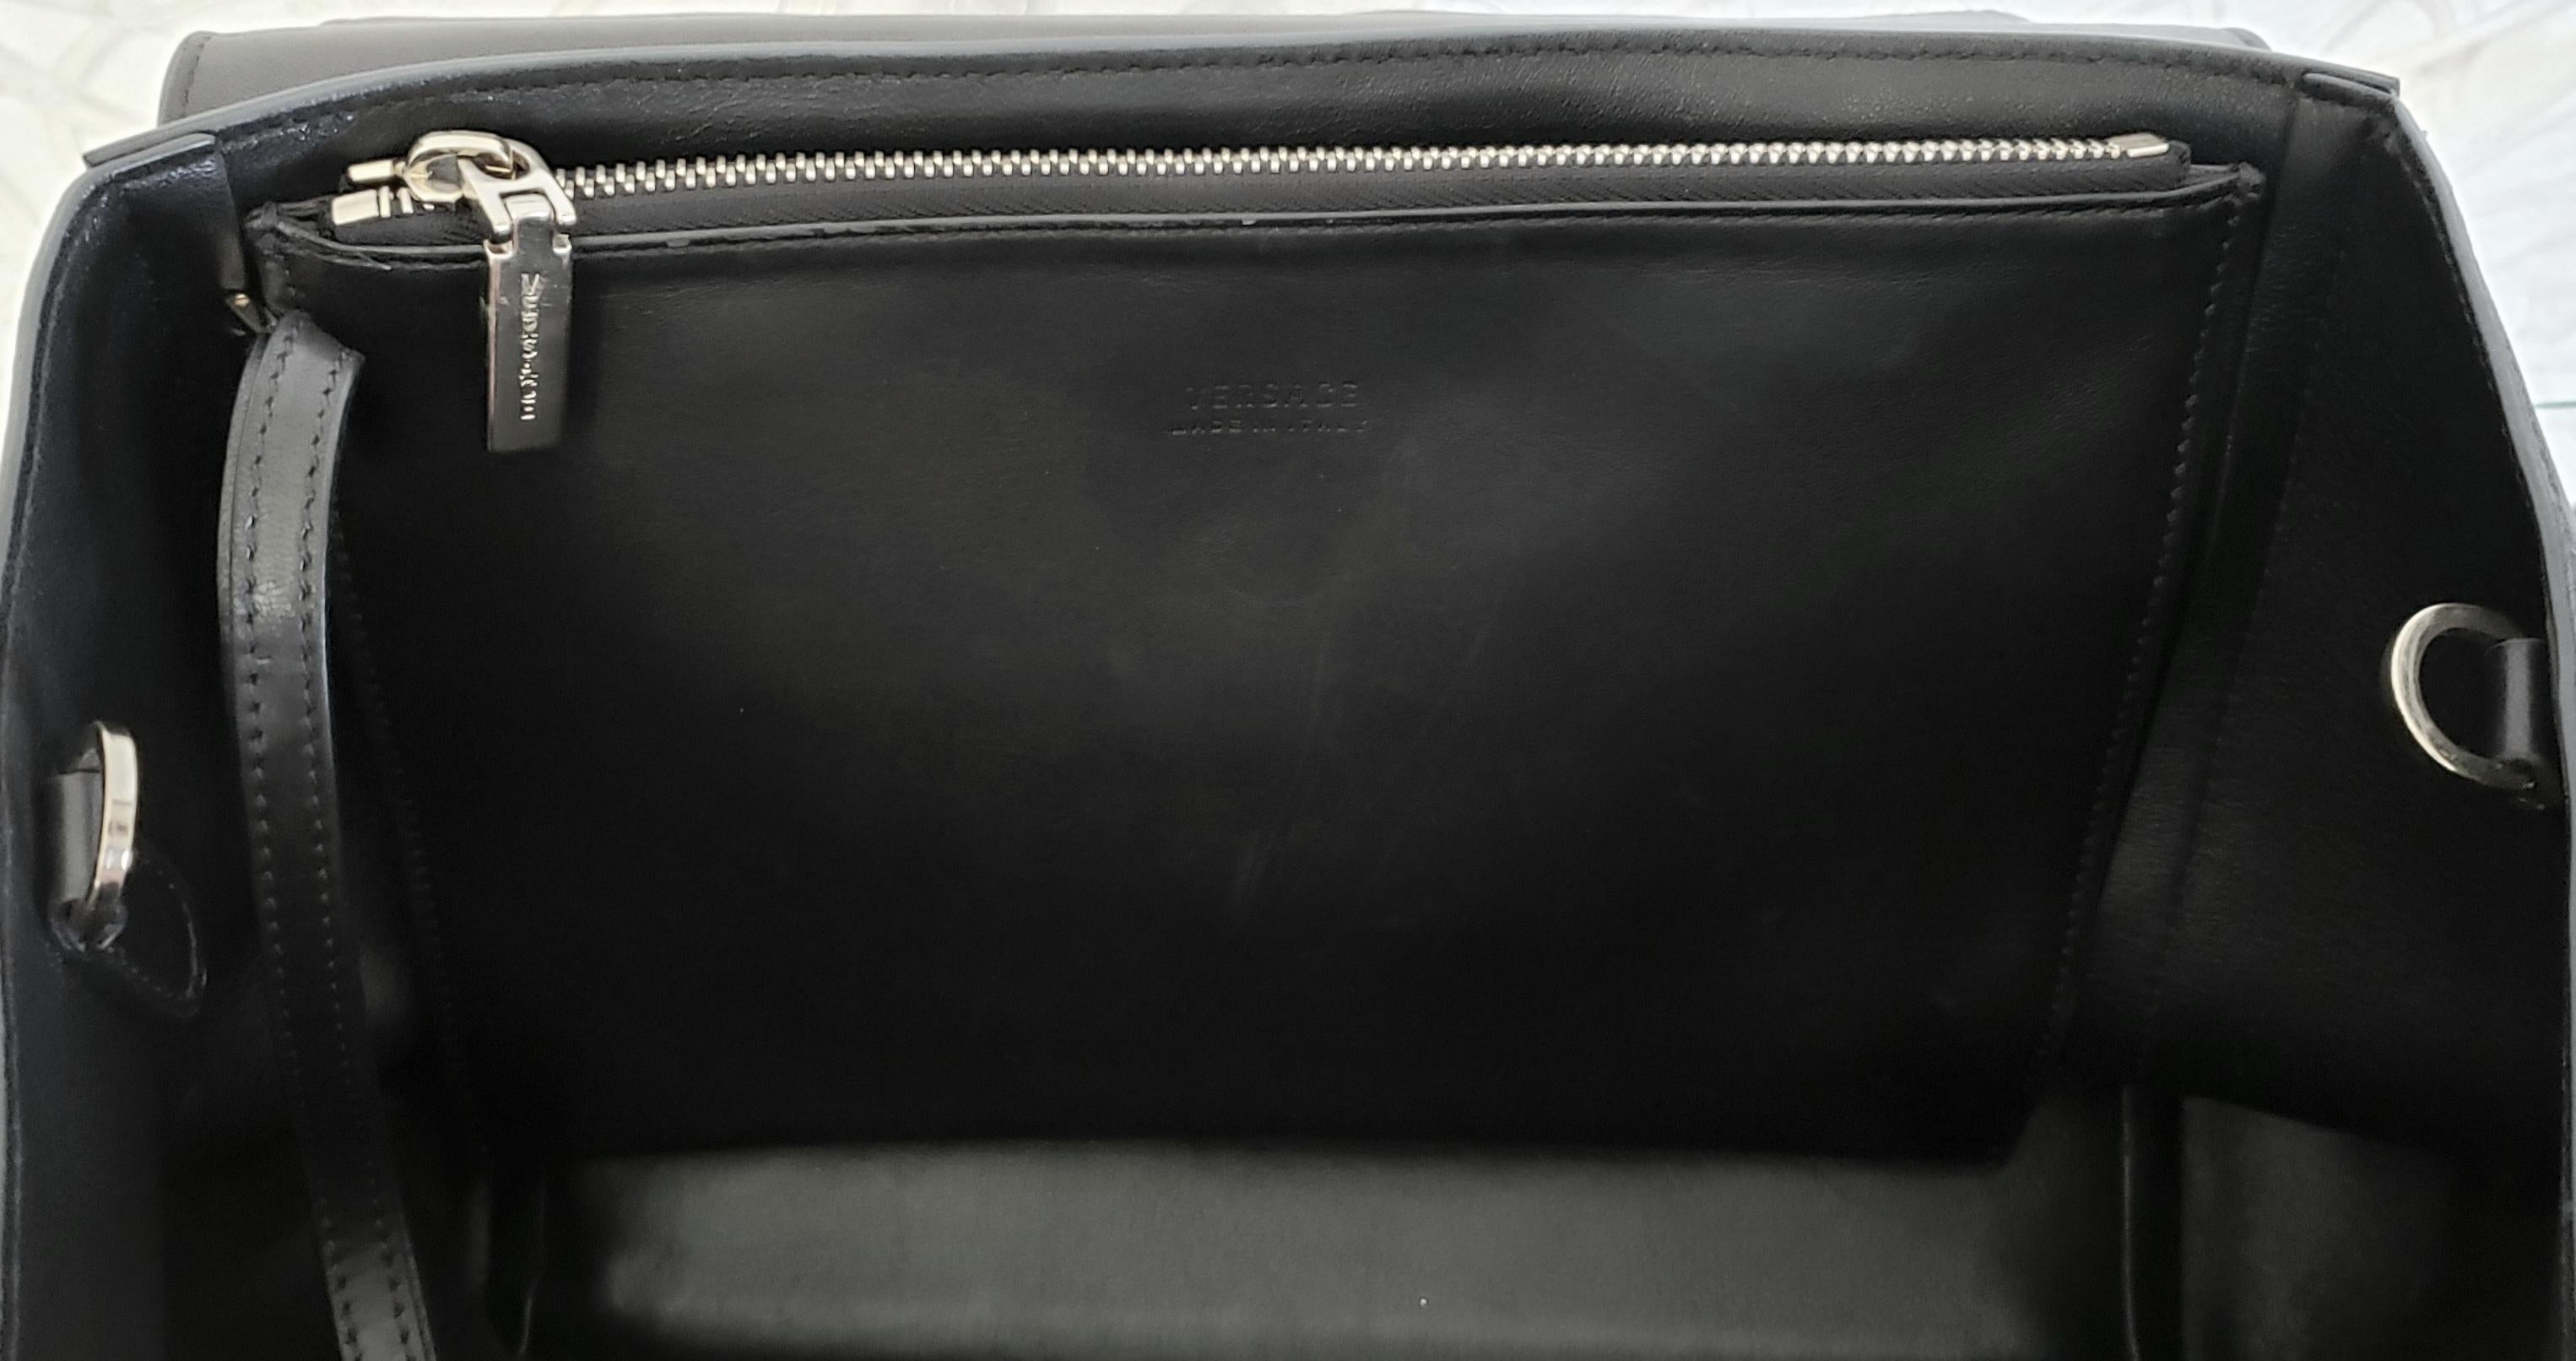 VERSACE BLACK LEATHER HANDBAG/SHOULDER BAG w/REMOVABLE PACKET PURSE In Excellent Condition For Sale In Montgomery, TX